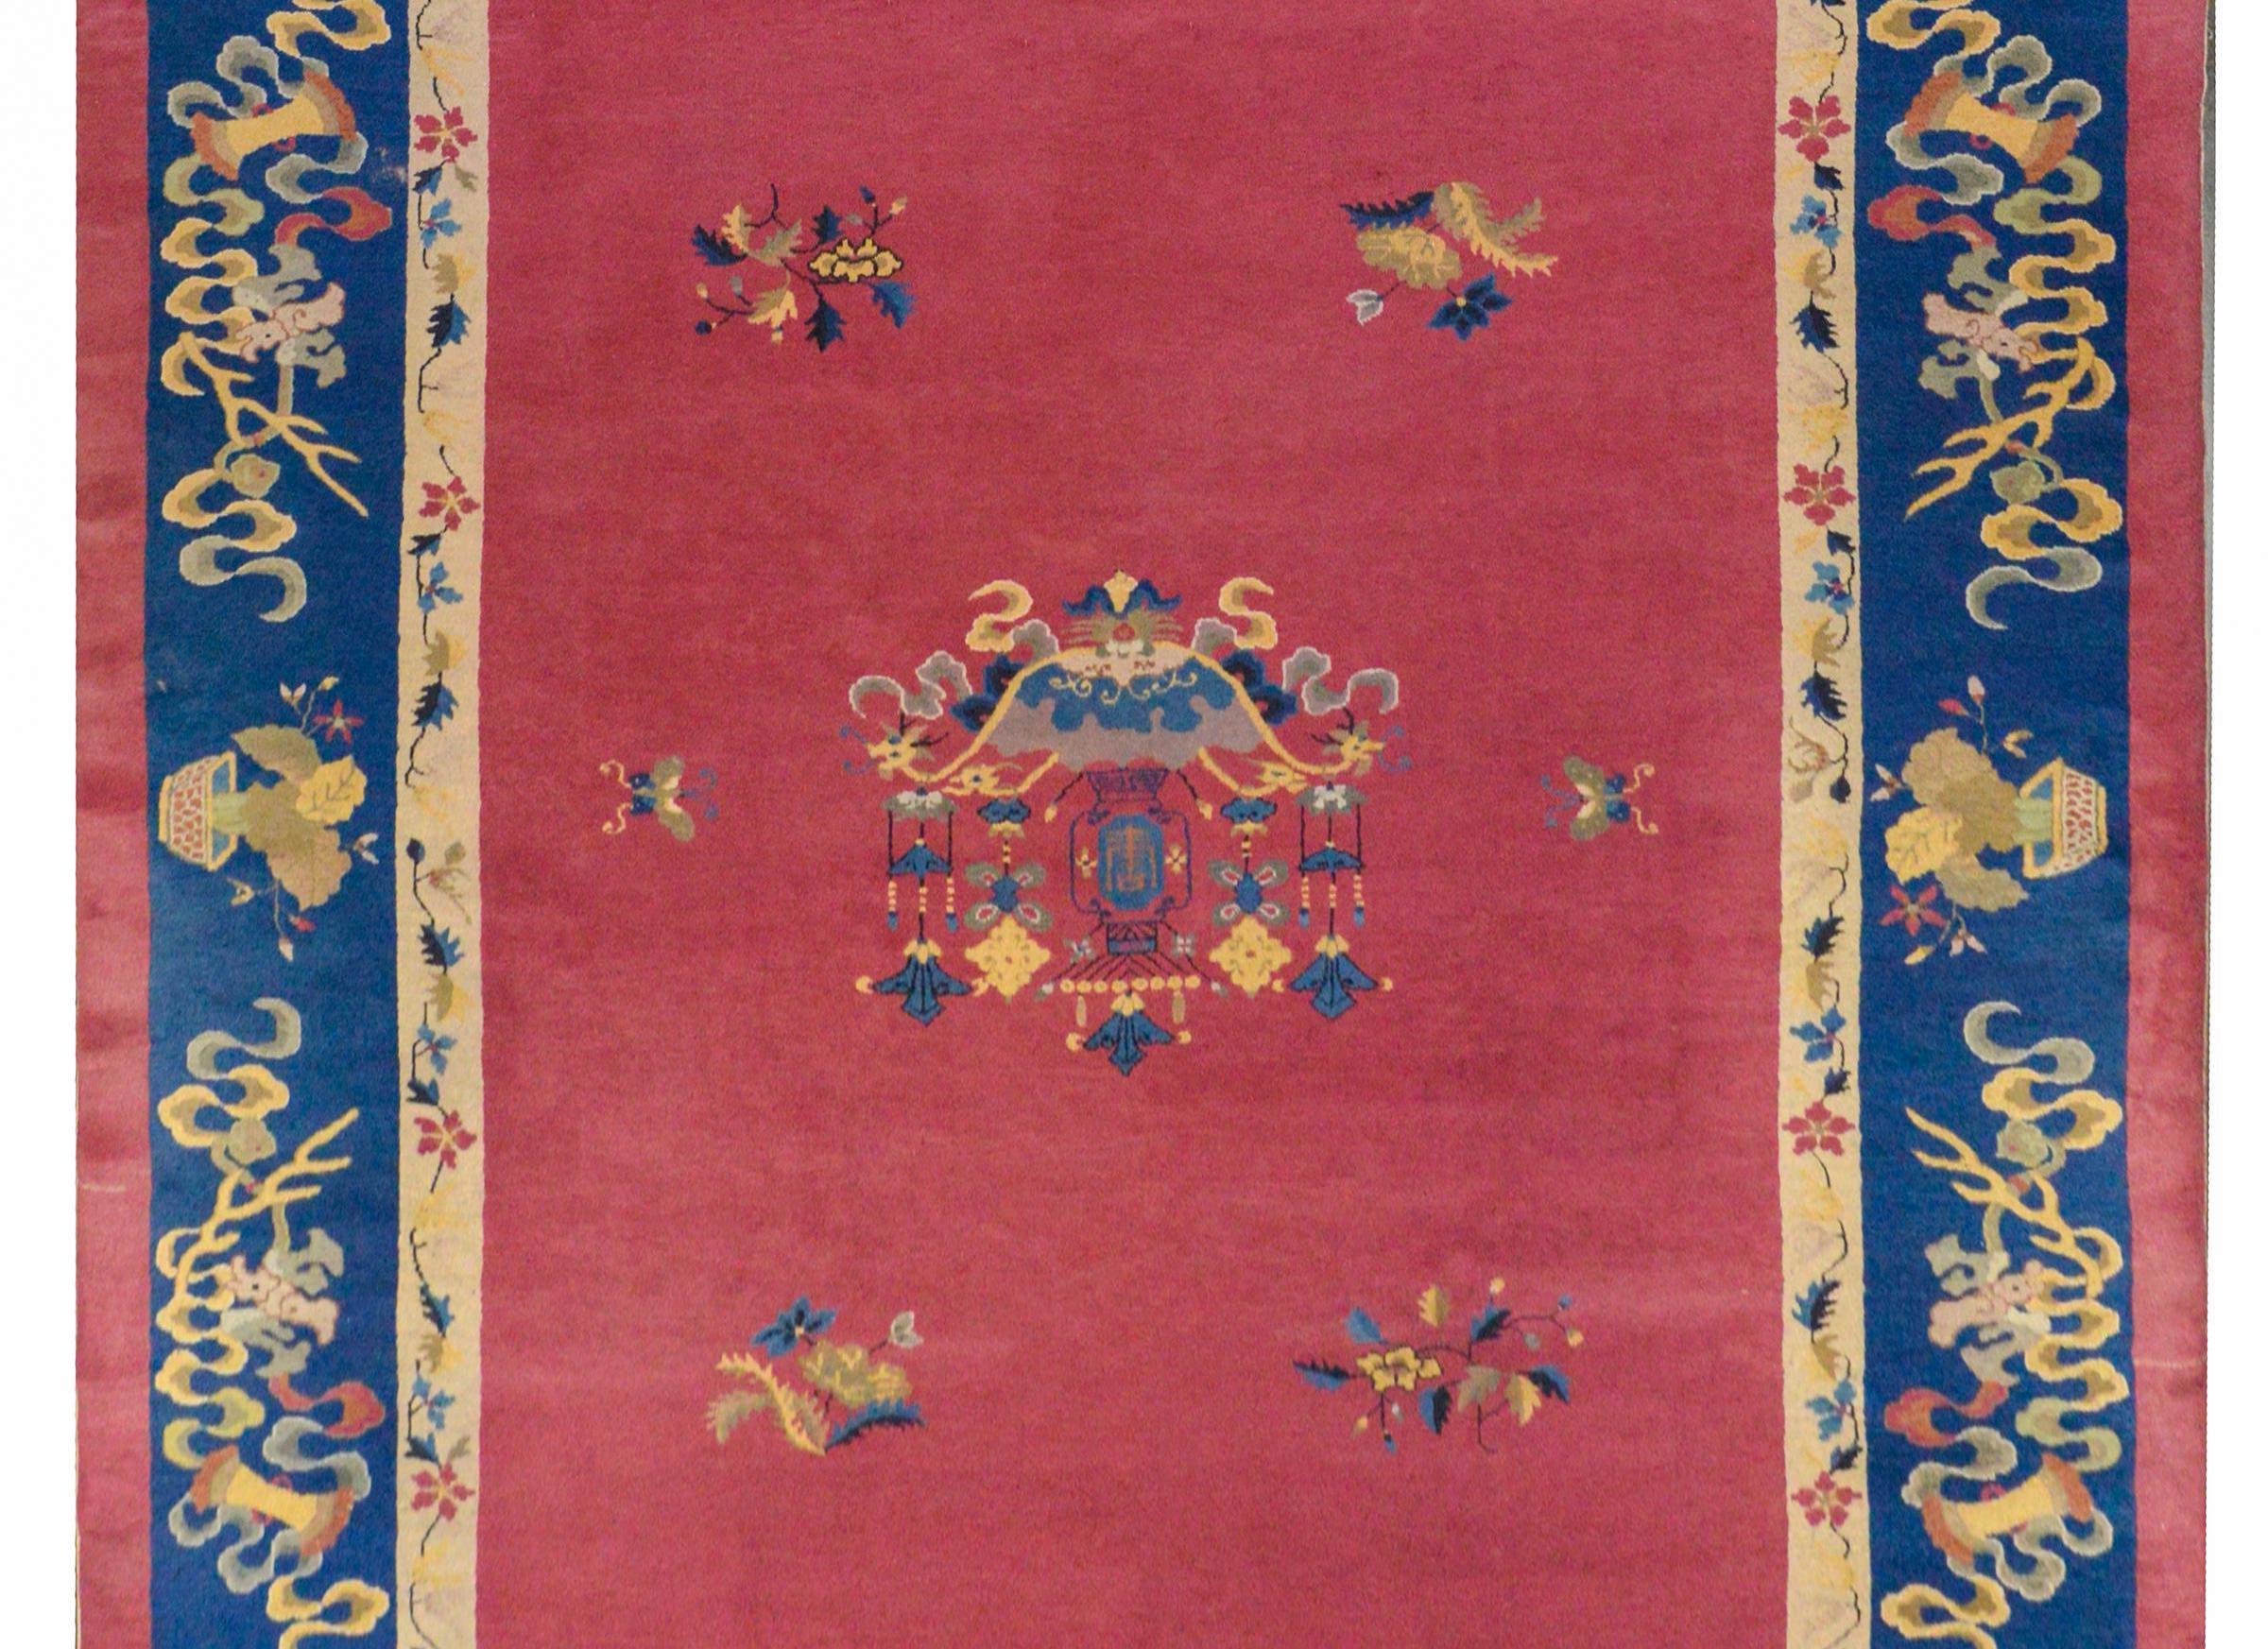 A beautiful early 20th century Chinese Art deco rug with a cranberry field with multi-colored hanging lanterns surrounded by a wide indigo and narrow cream colored border with auspicious flowering plants and Fu characters, symbols of good fortune.